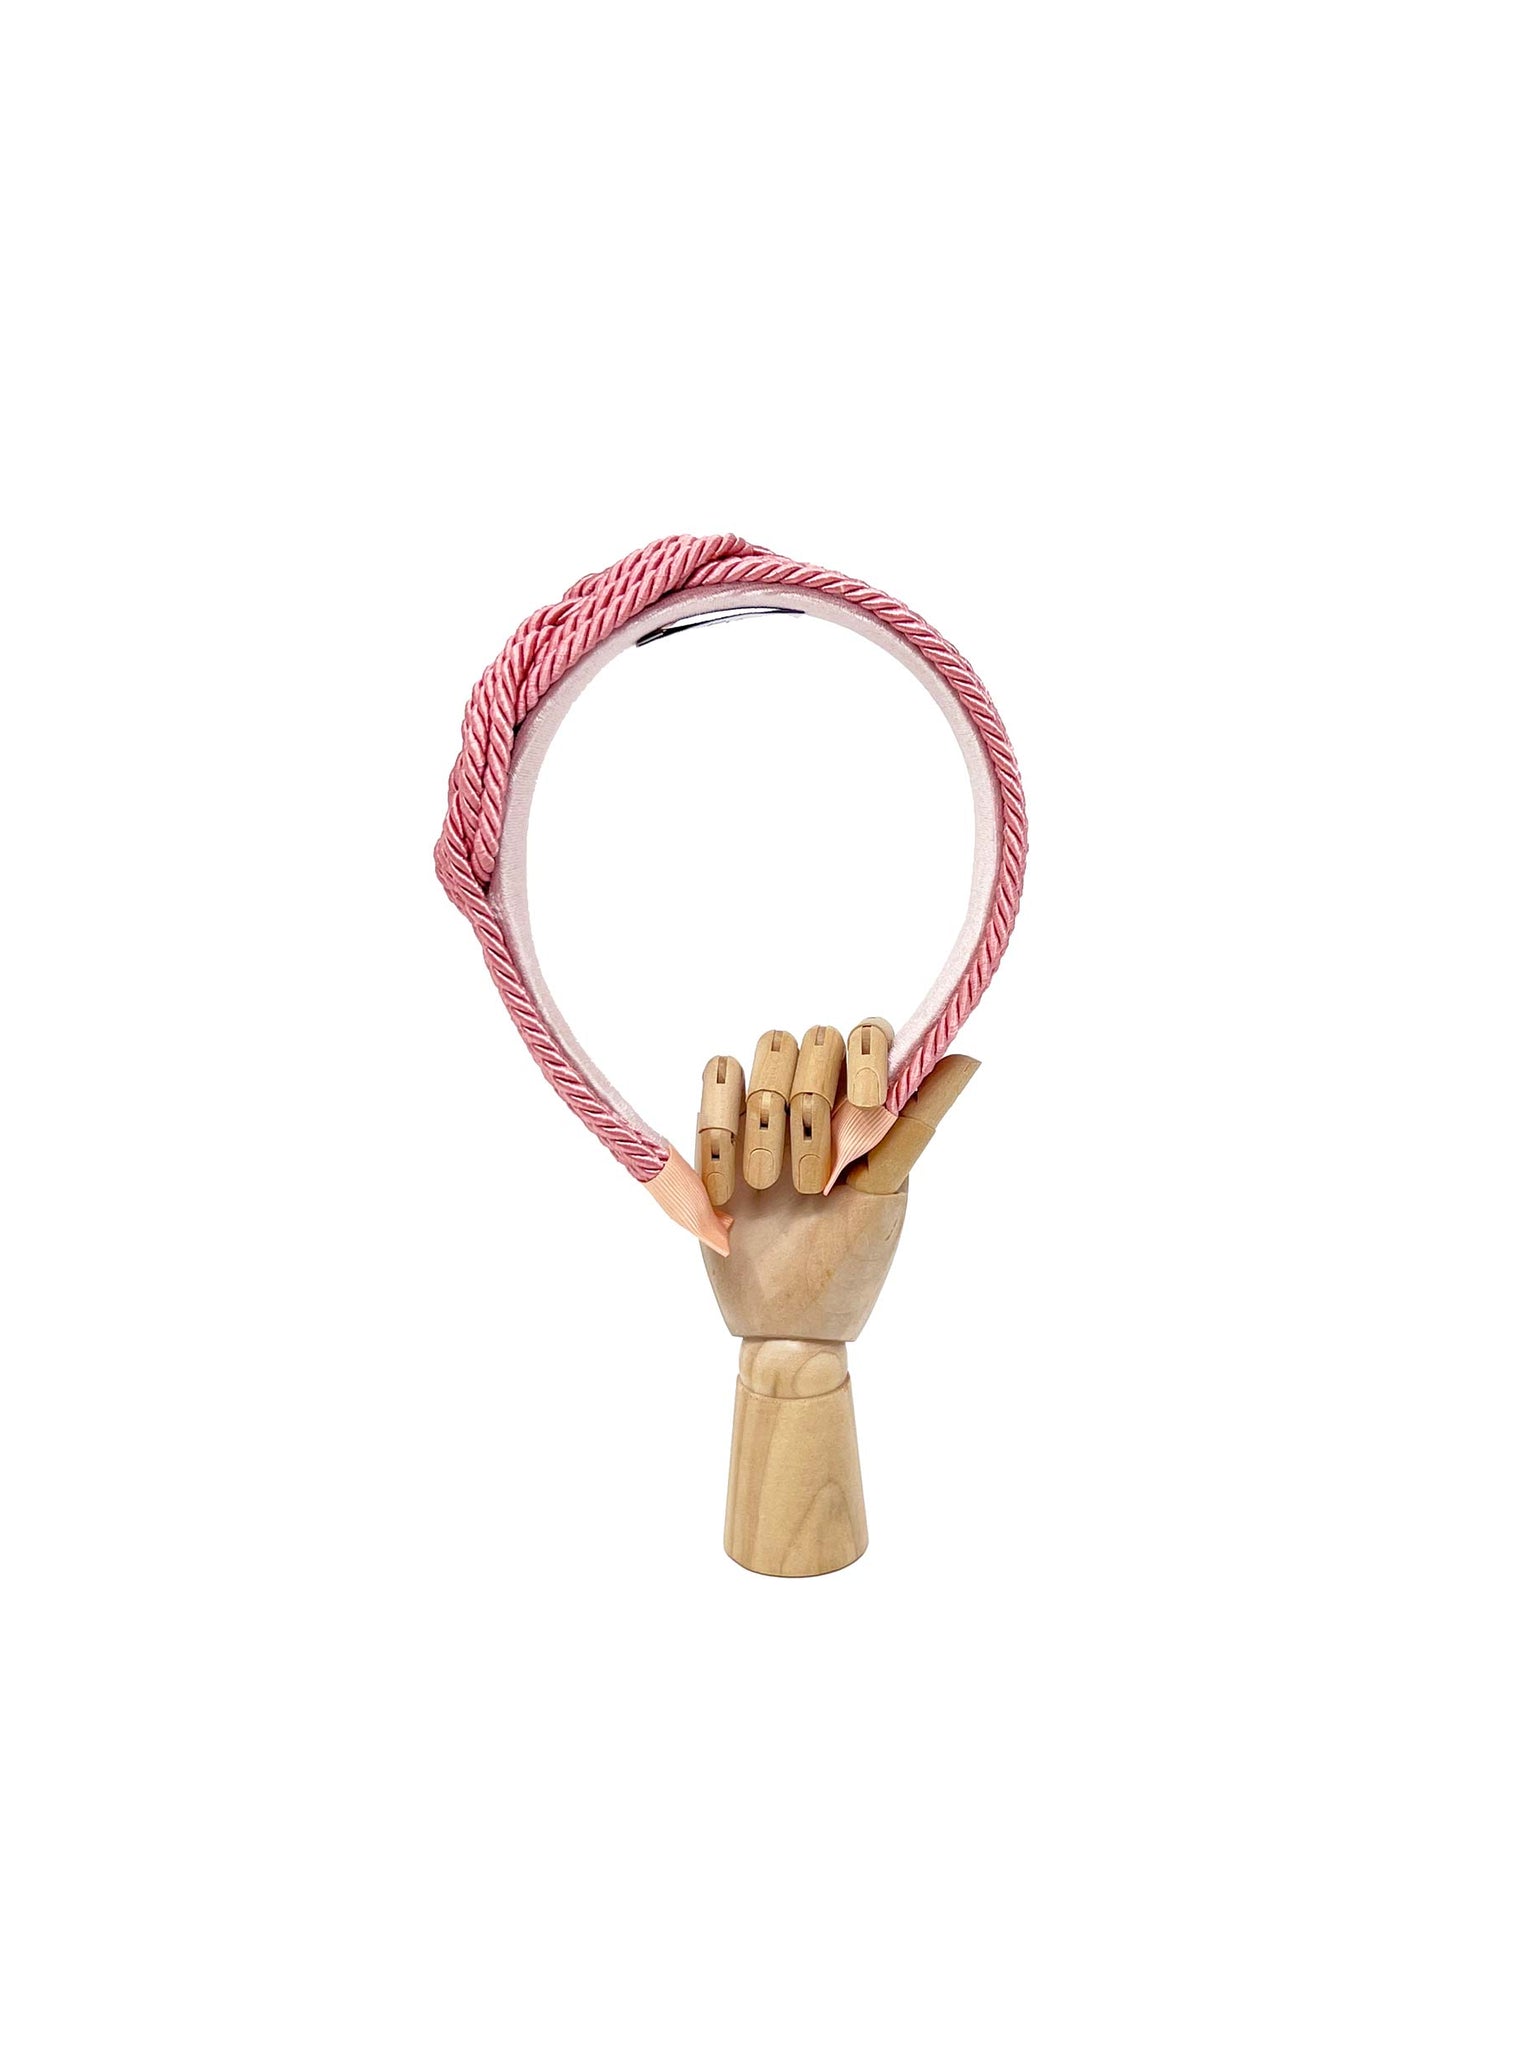 Pink three-strand hairband with side braided knot